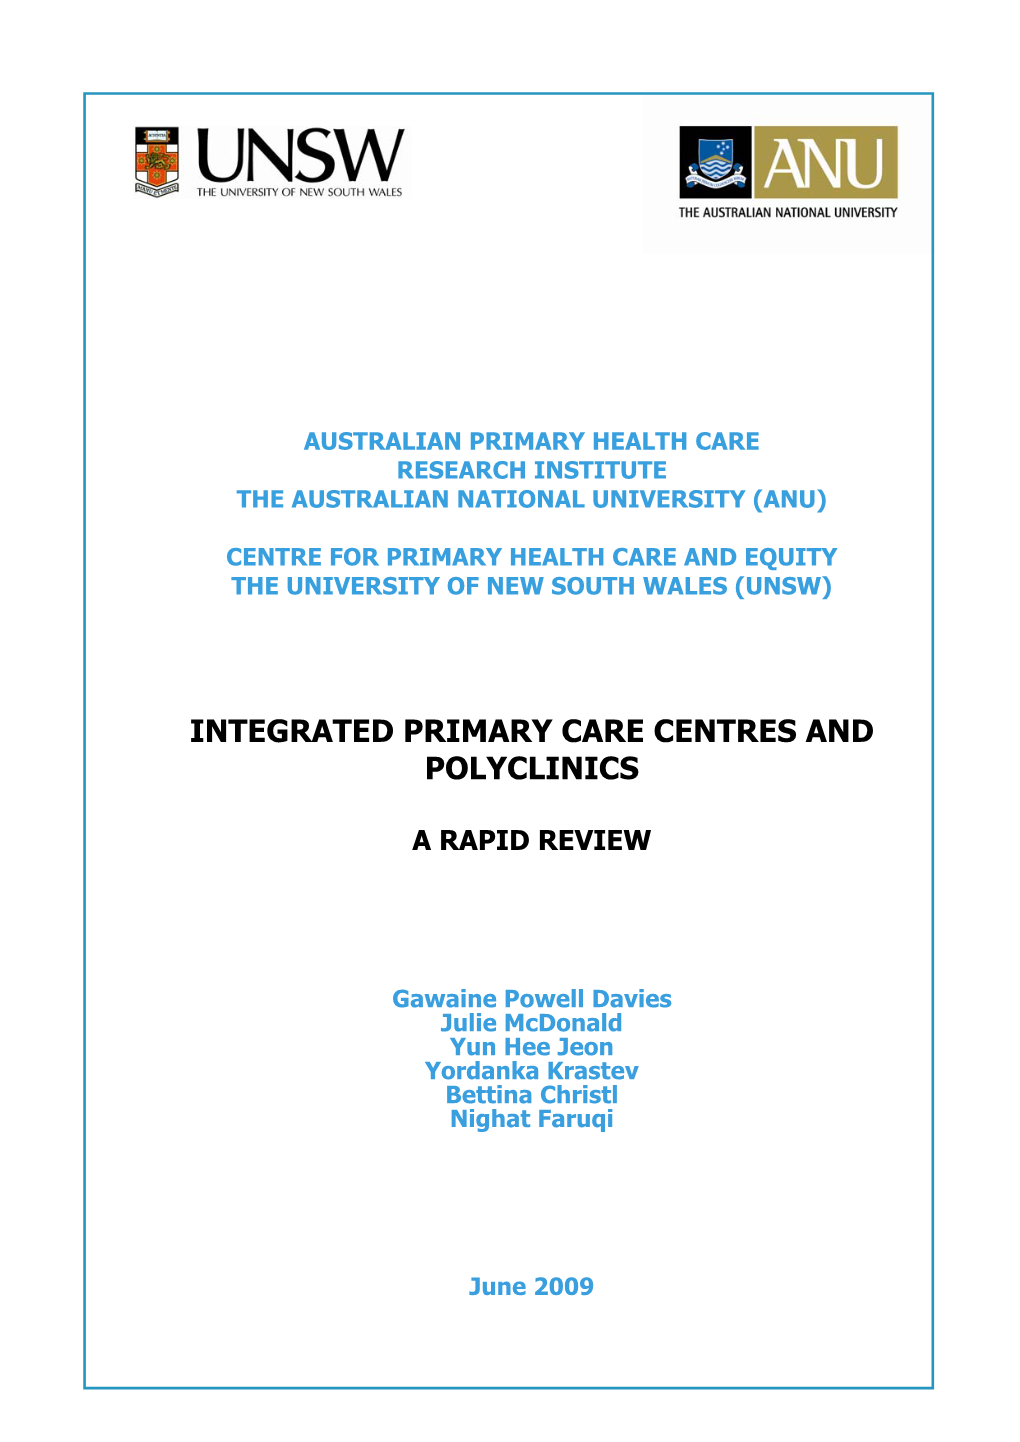 Rapid Review: Integrated Primary Care Centres